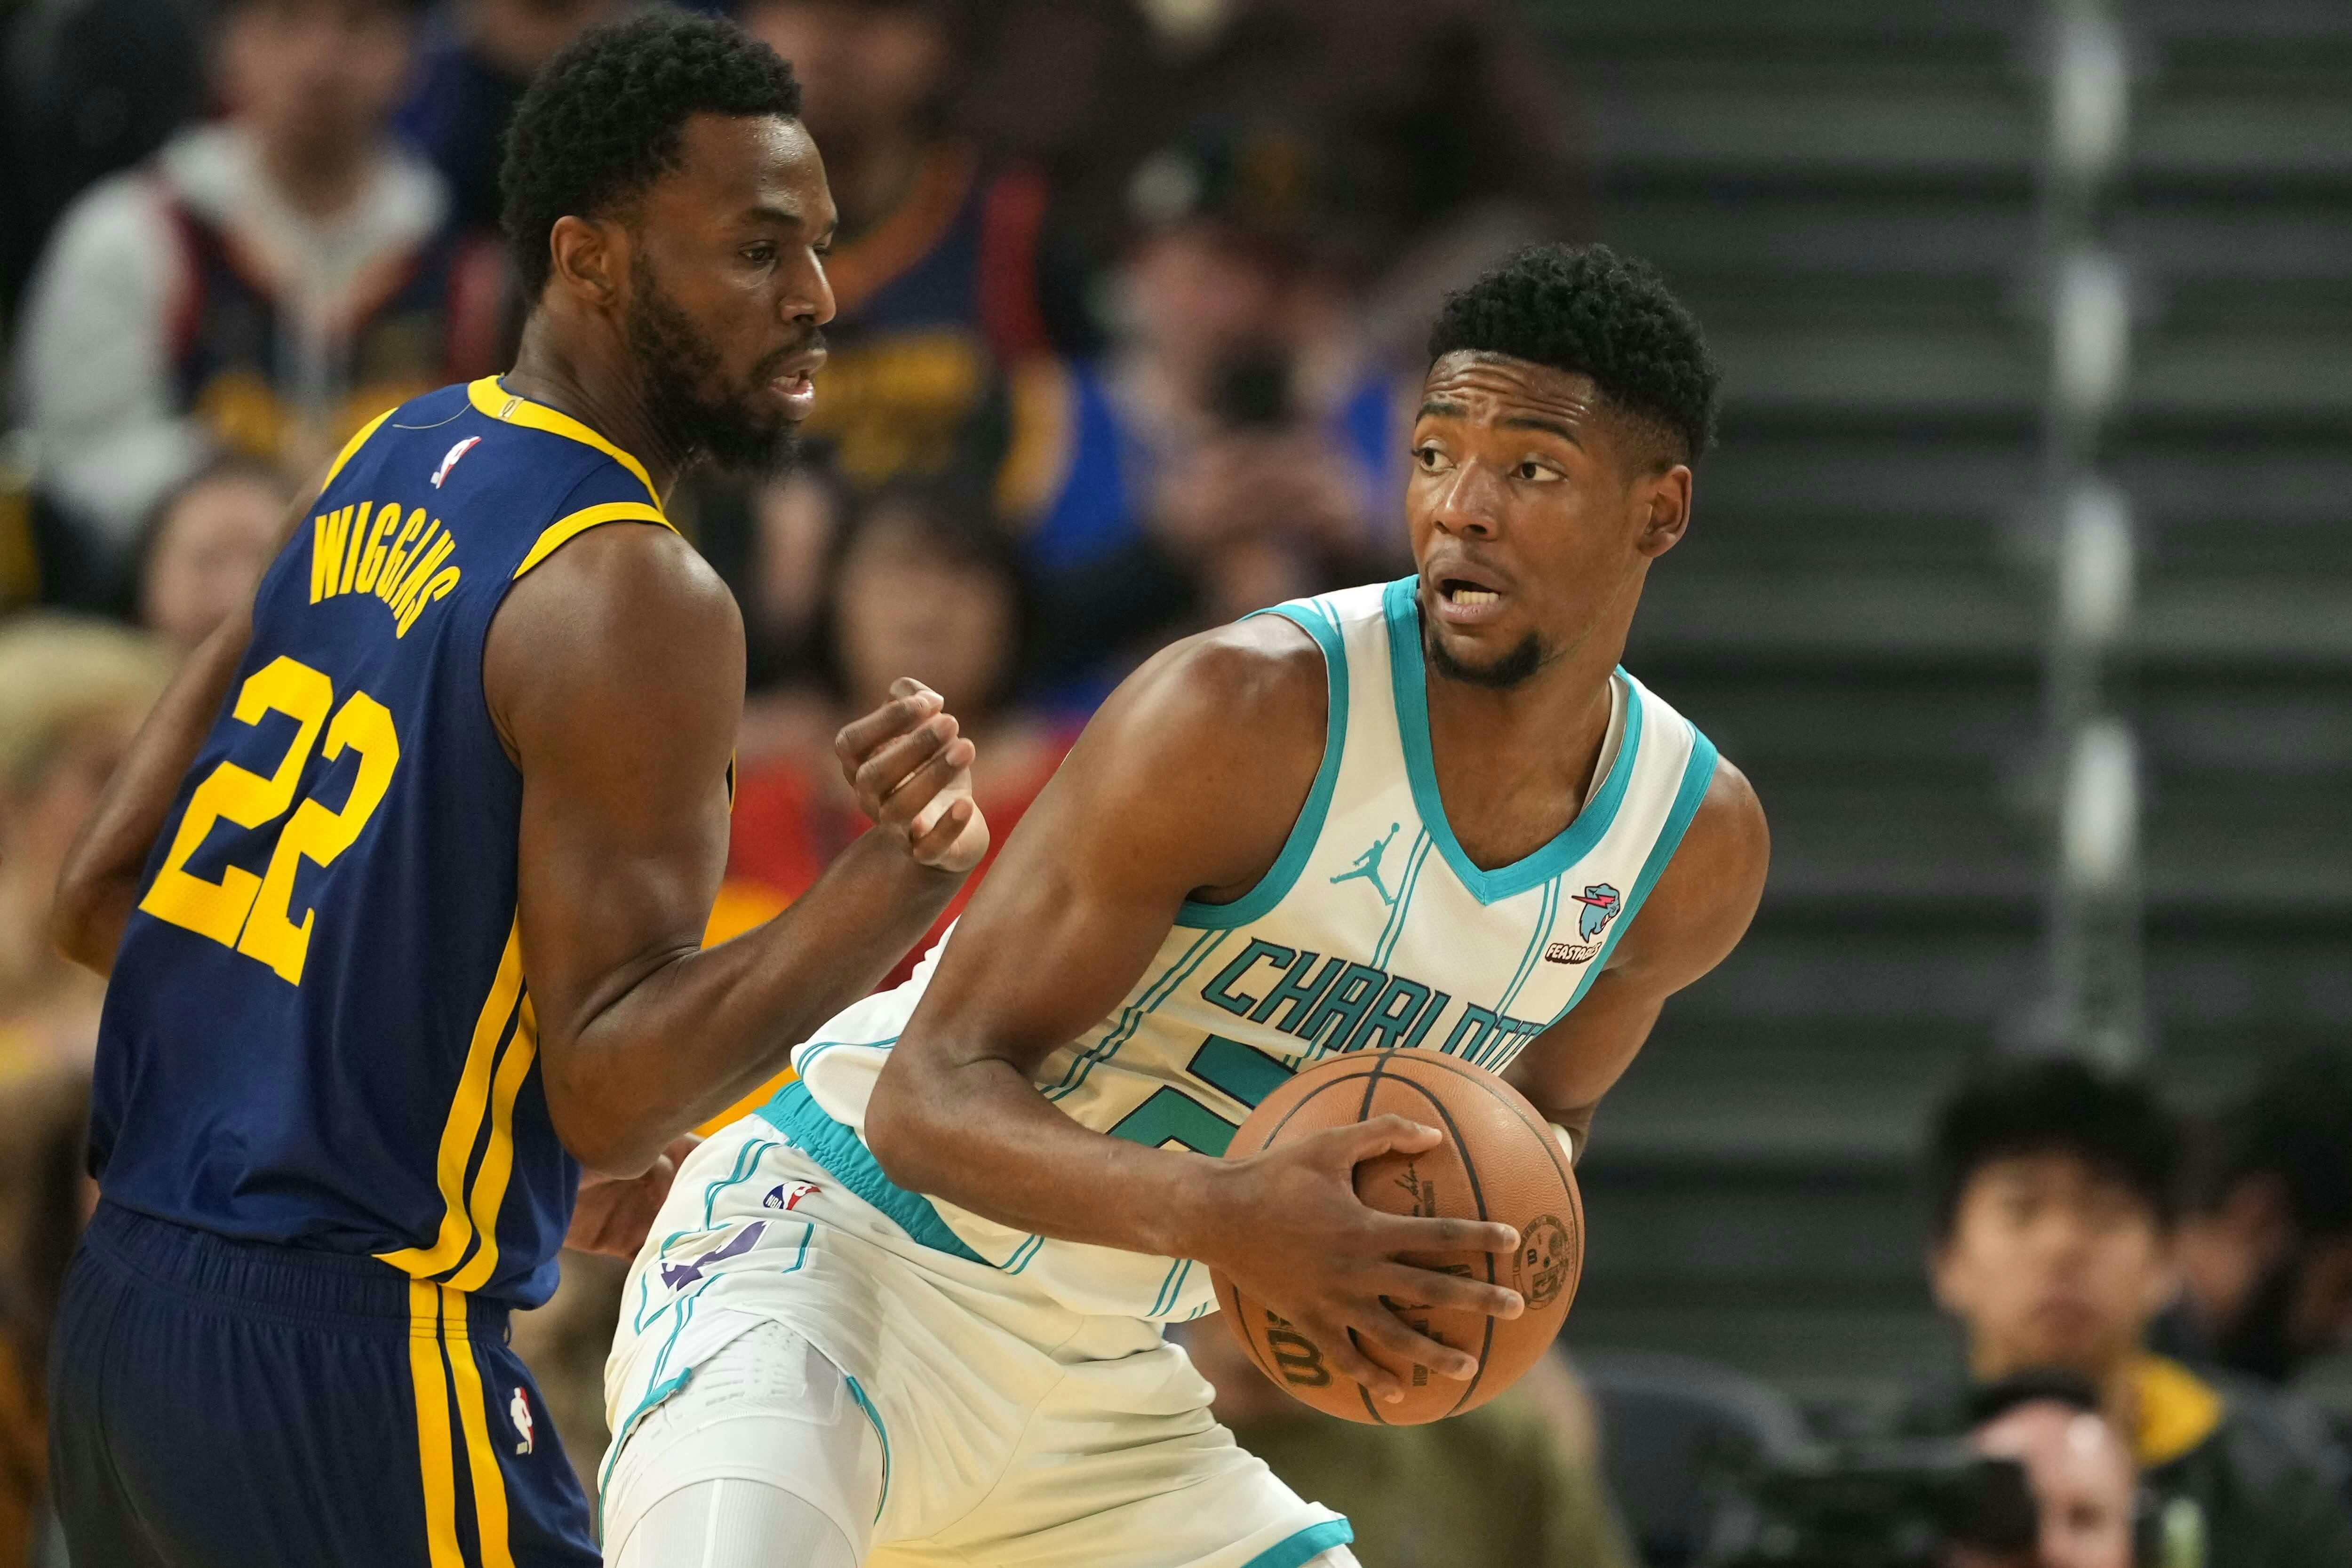 Hornets' rookie Brandon Miller is one of league's best young players